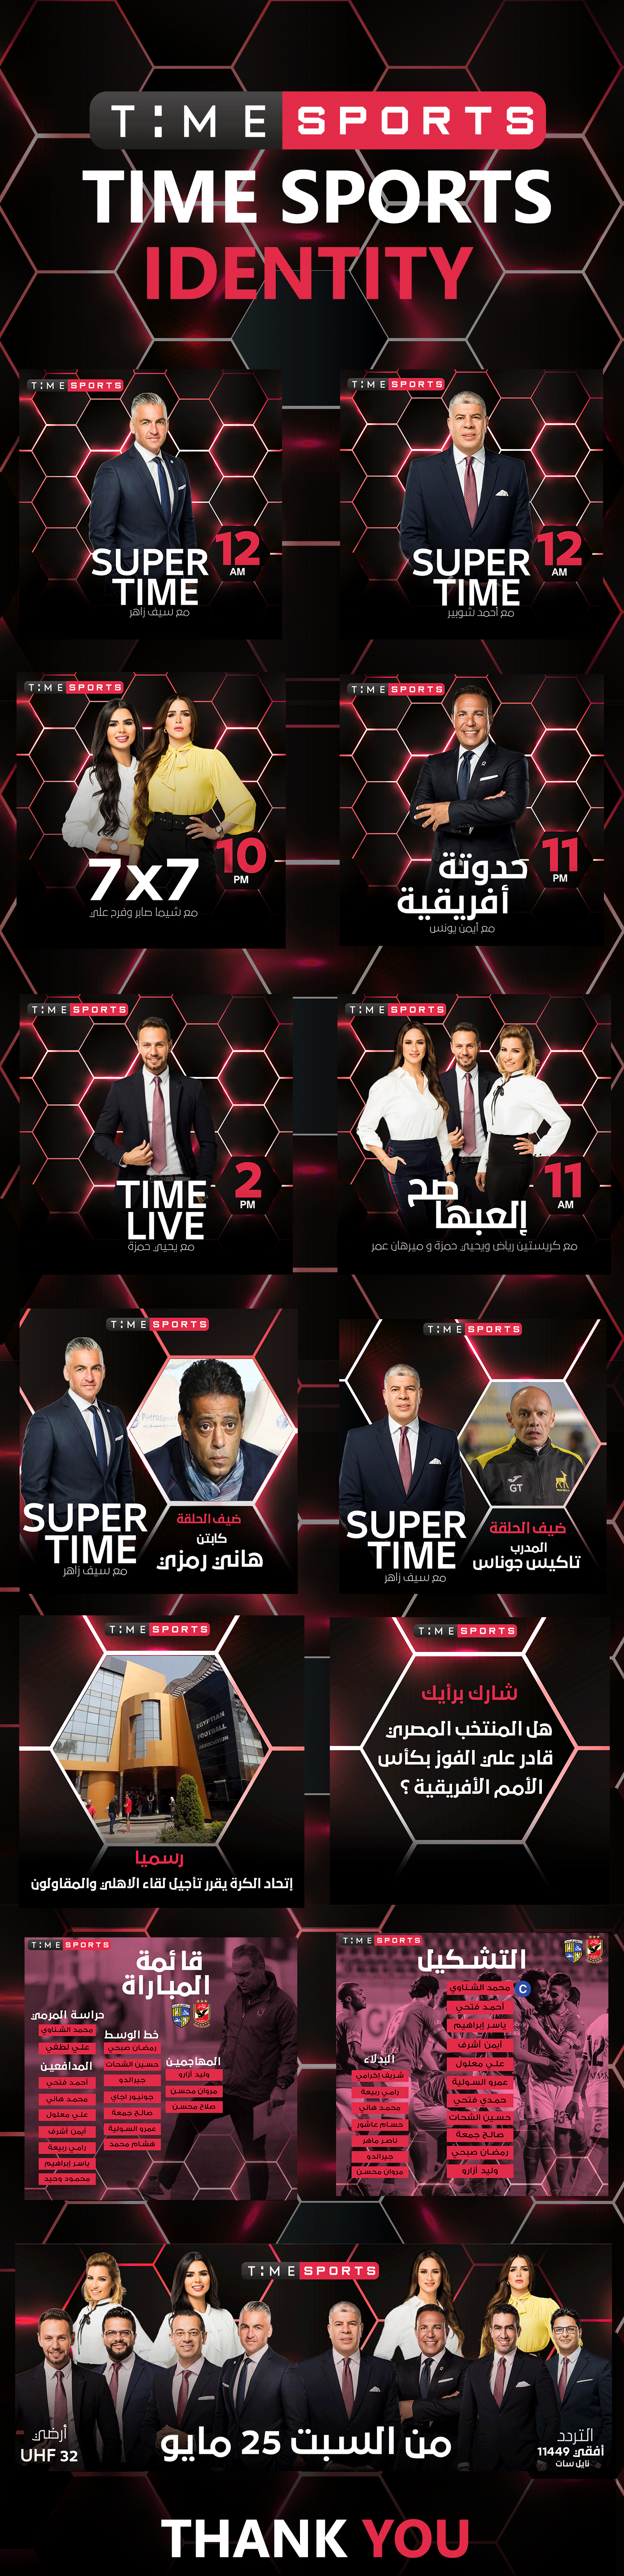 time timesports sport